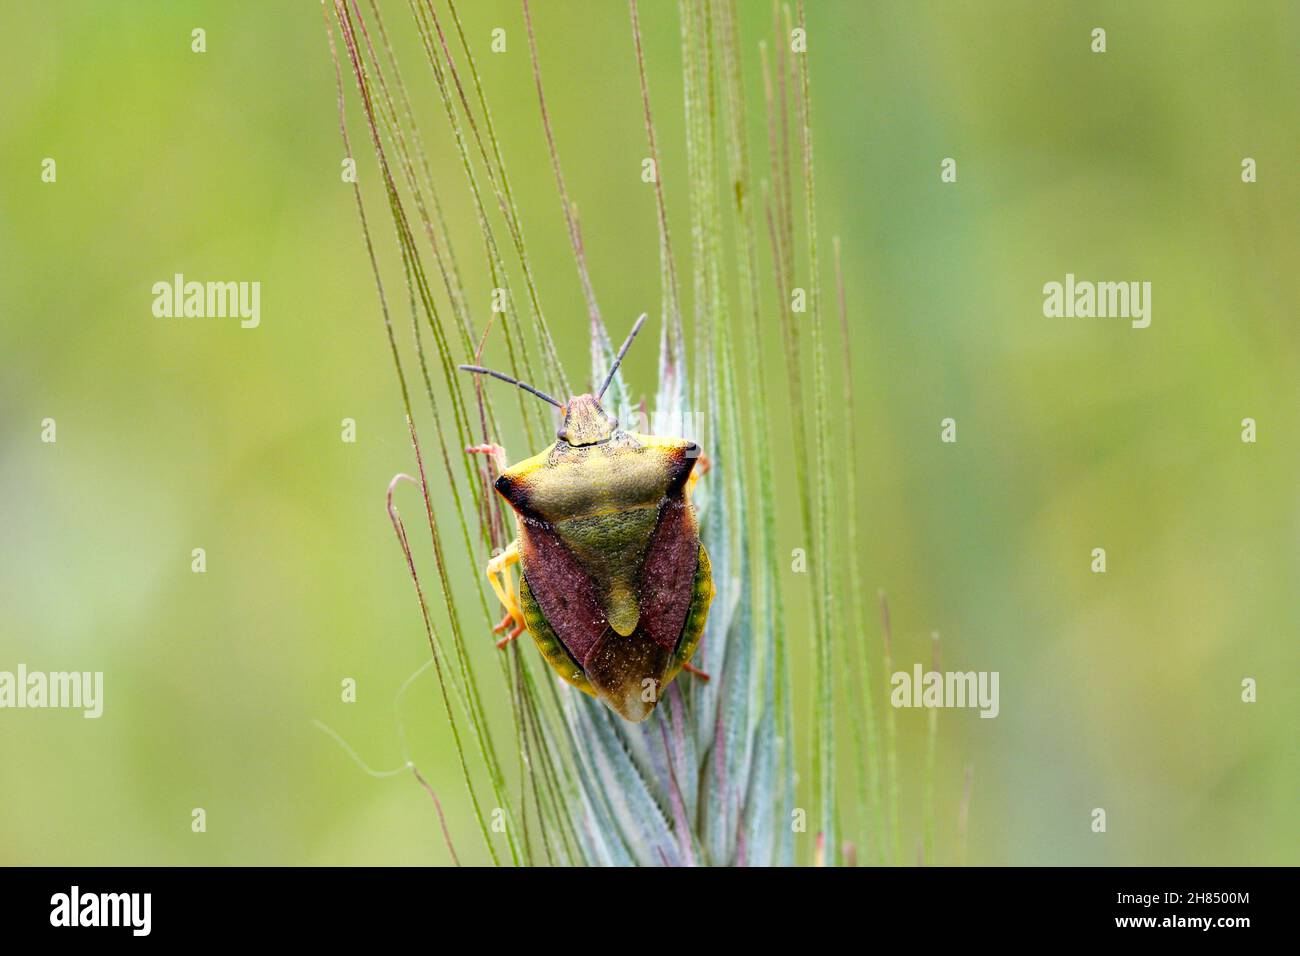 The shield bug Carpocoris fuscispinus macro. An insect resting on a stalk of cereal. Stock Photo